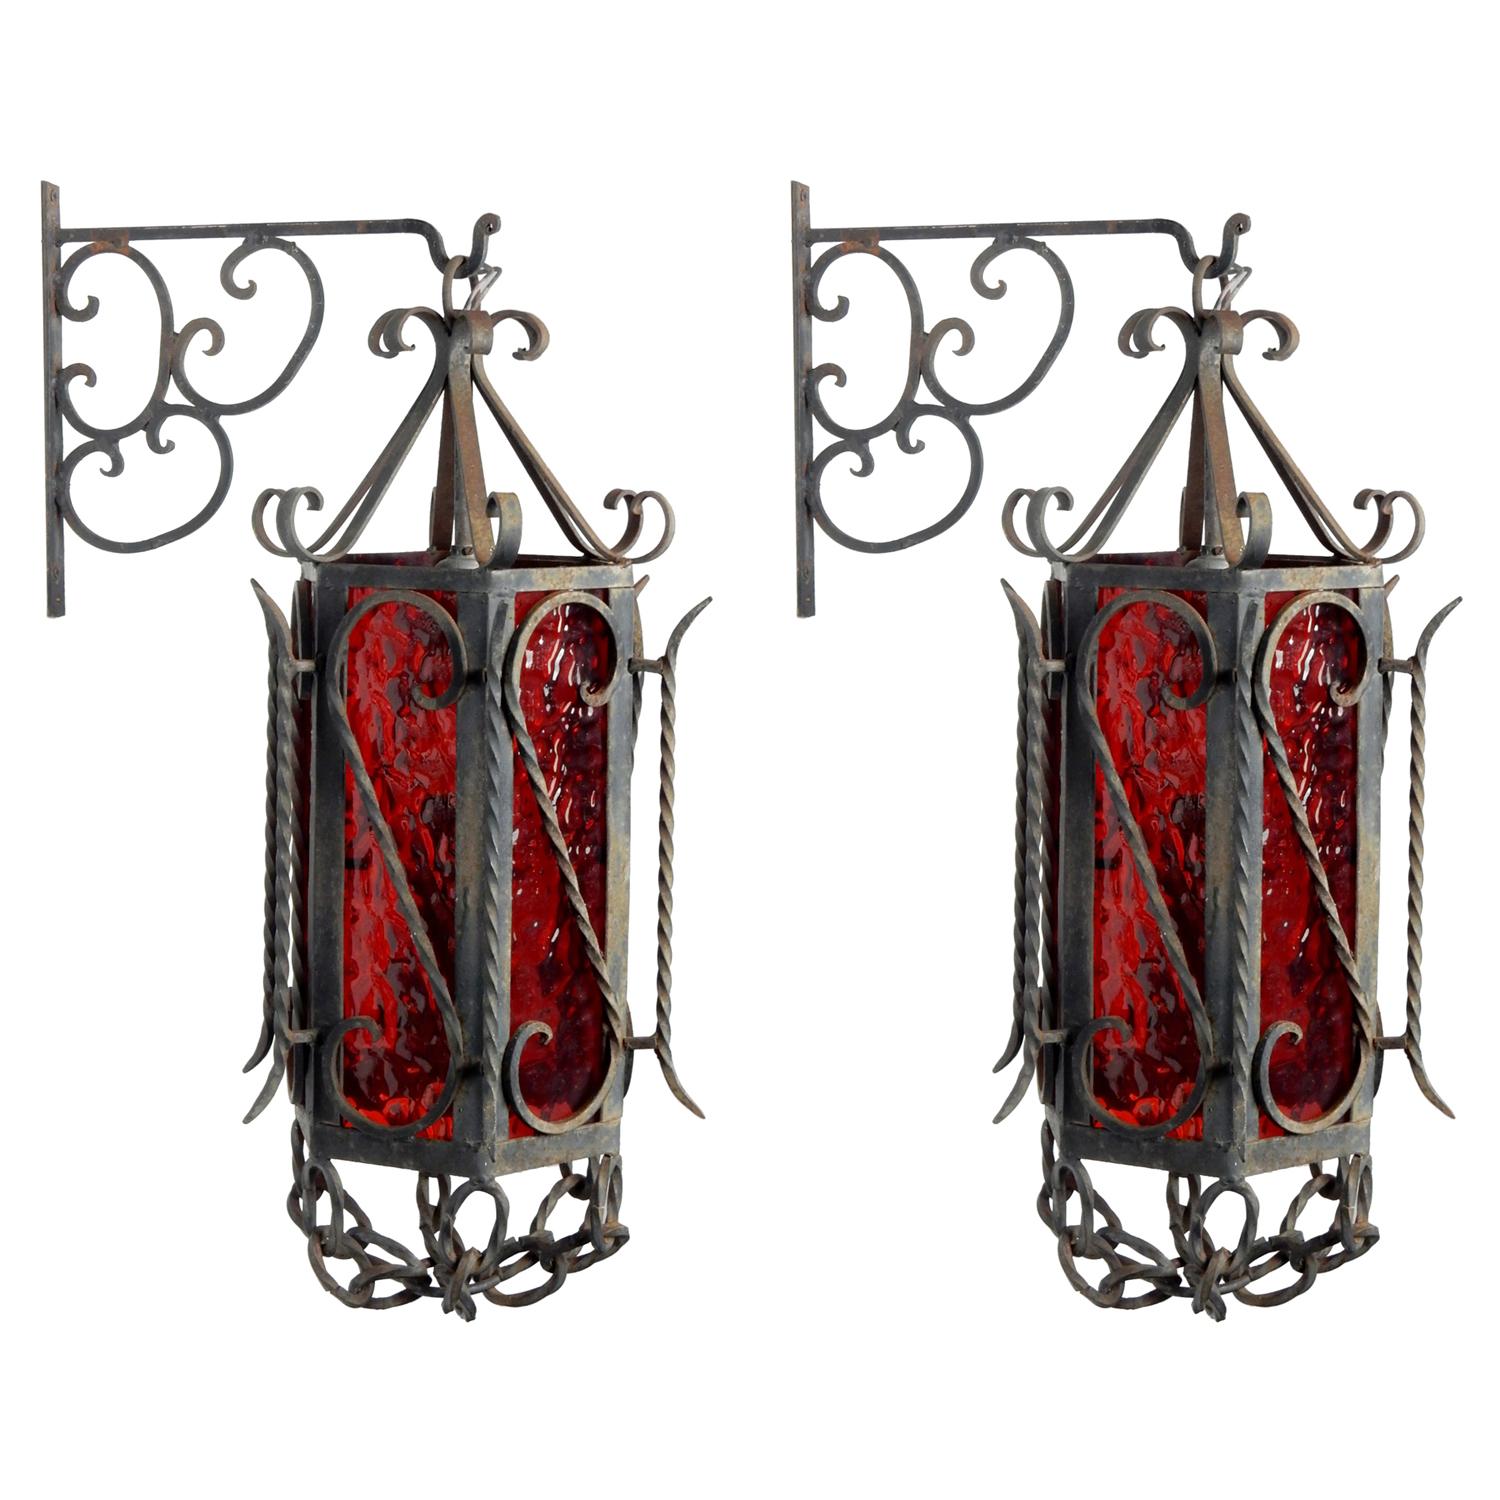 California Craftsman Iron Ornate Sconces Pendant Lamps with Ruby Red Glass, Pair